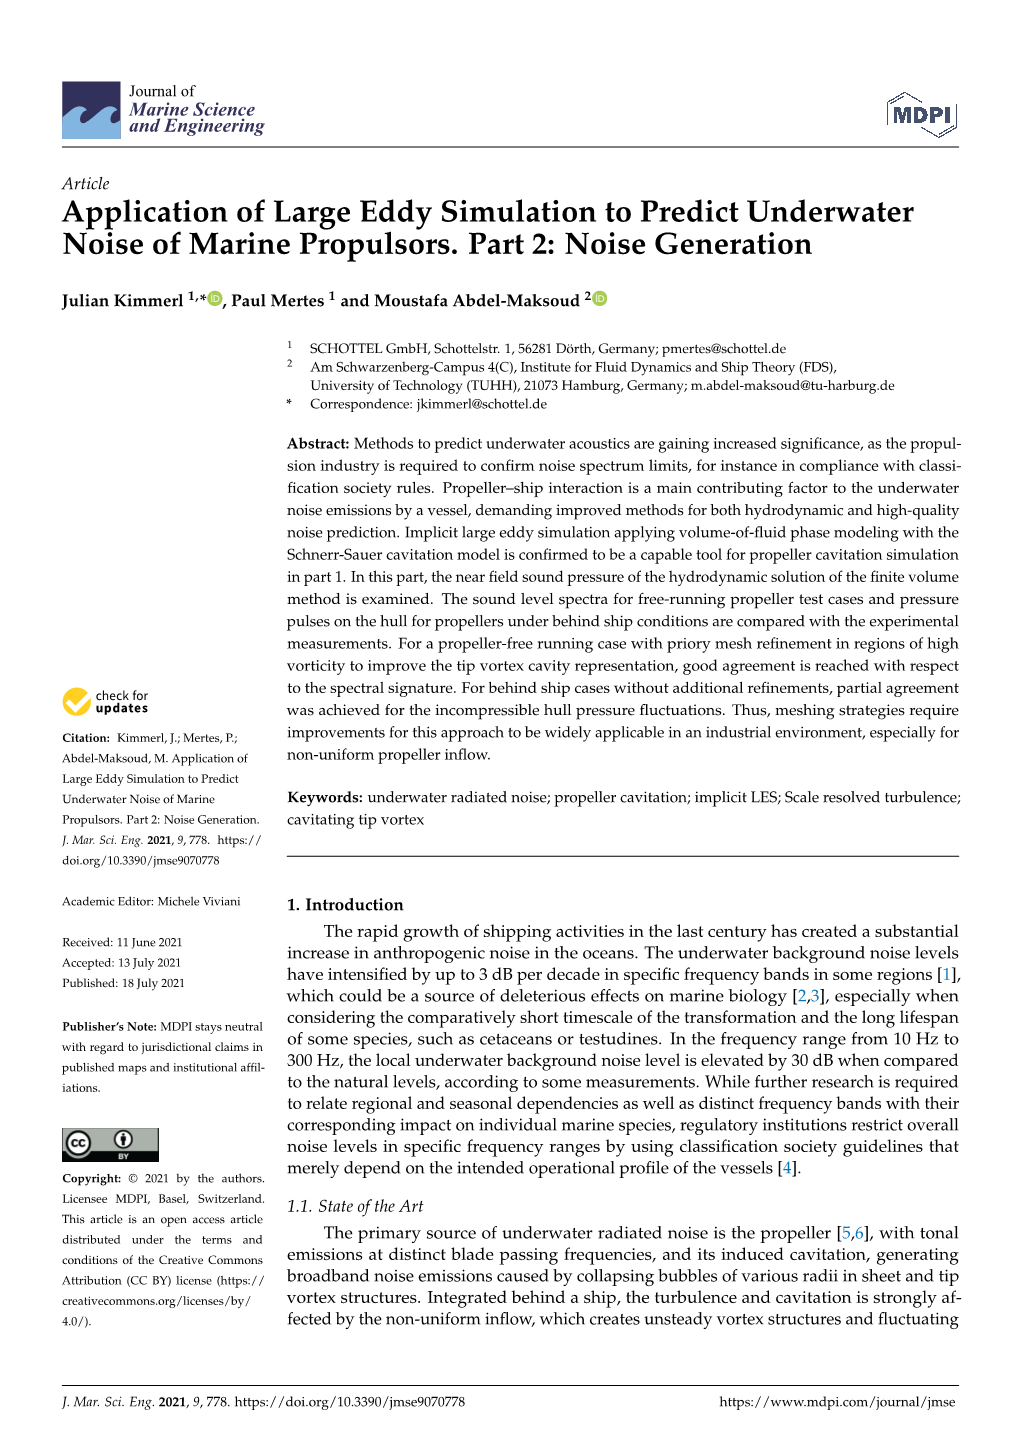 Application of Large Eddy Simulation to Predict Underwater Noise of Marine Propulsors